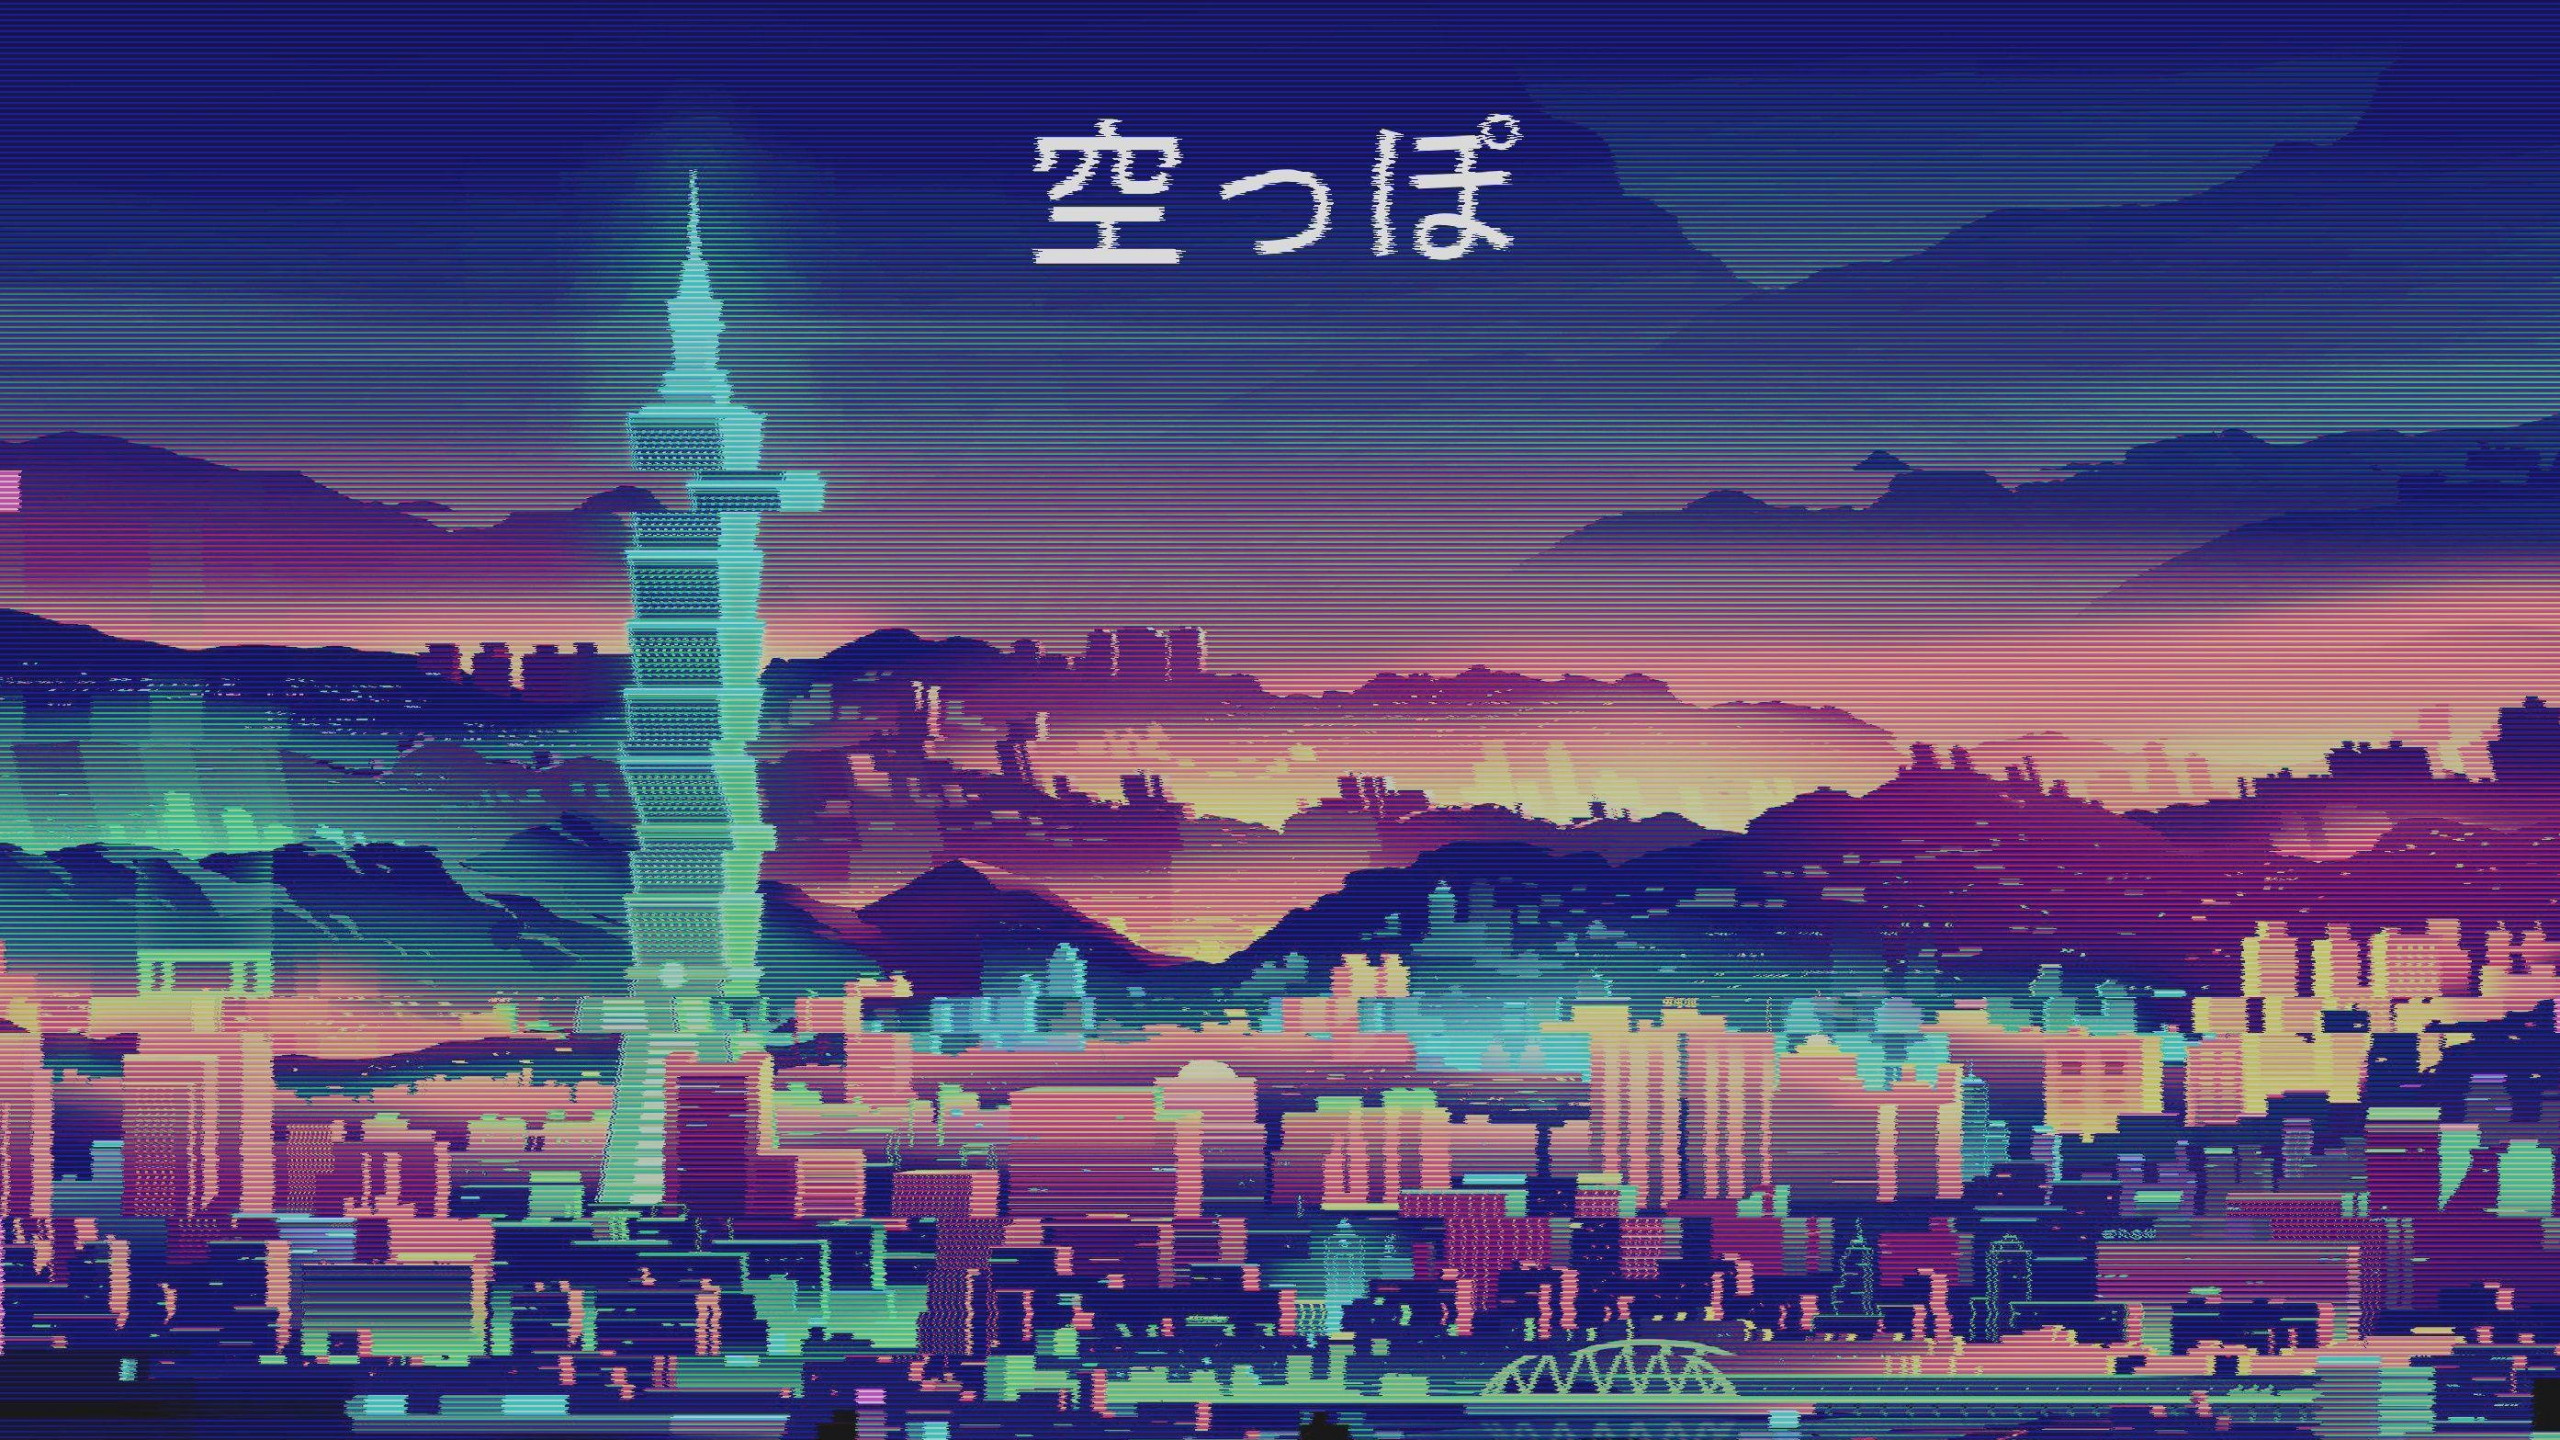 Aesthetic Taipei wallpaper for your phone and desktop. - Japan, YouTube